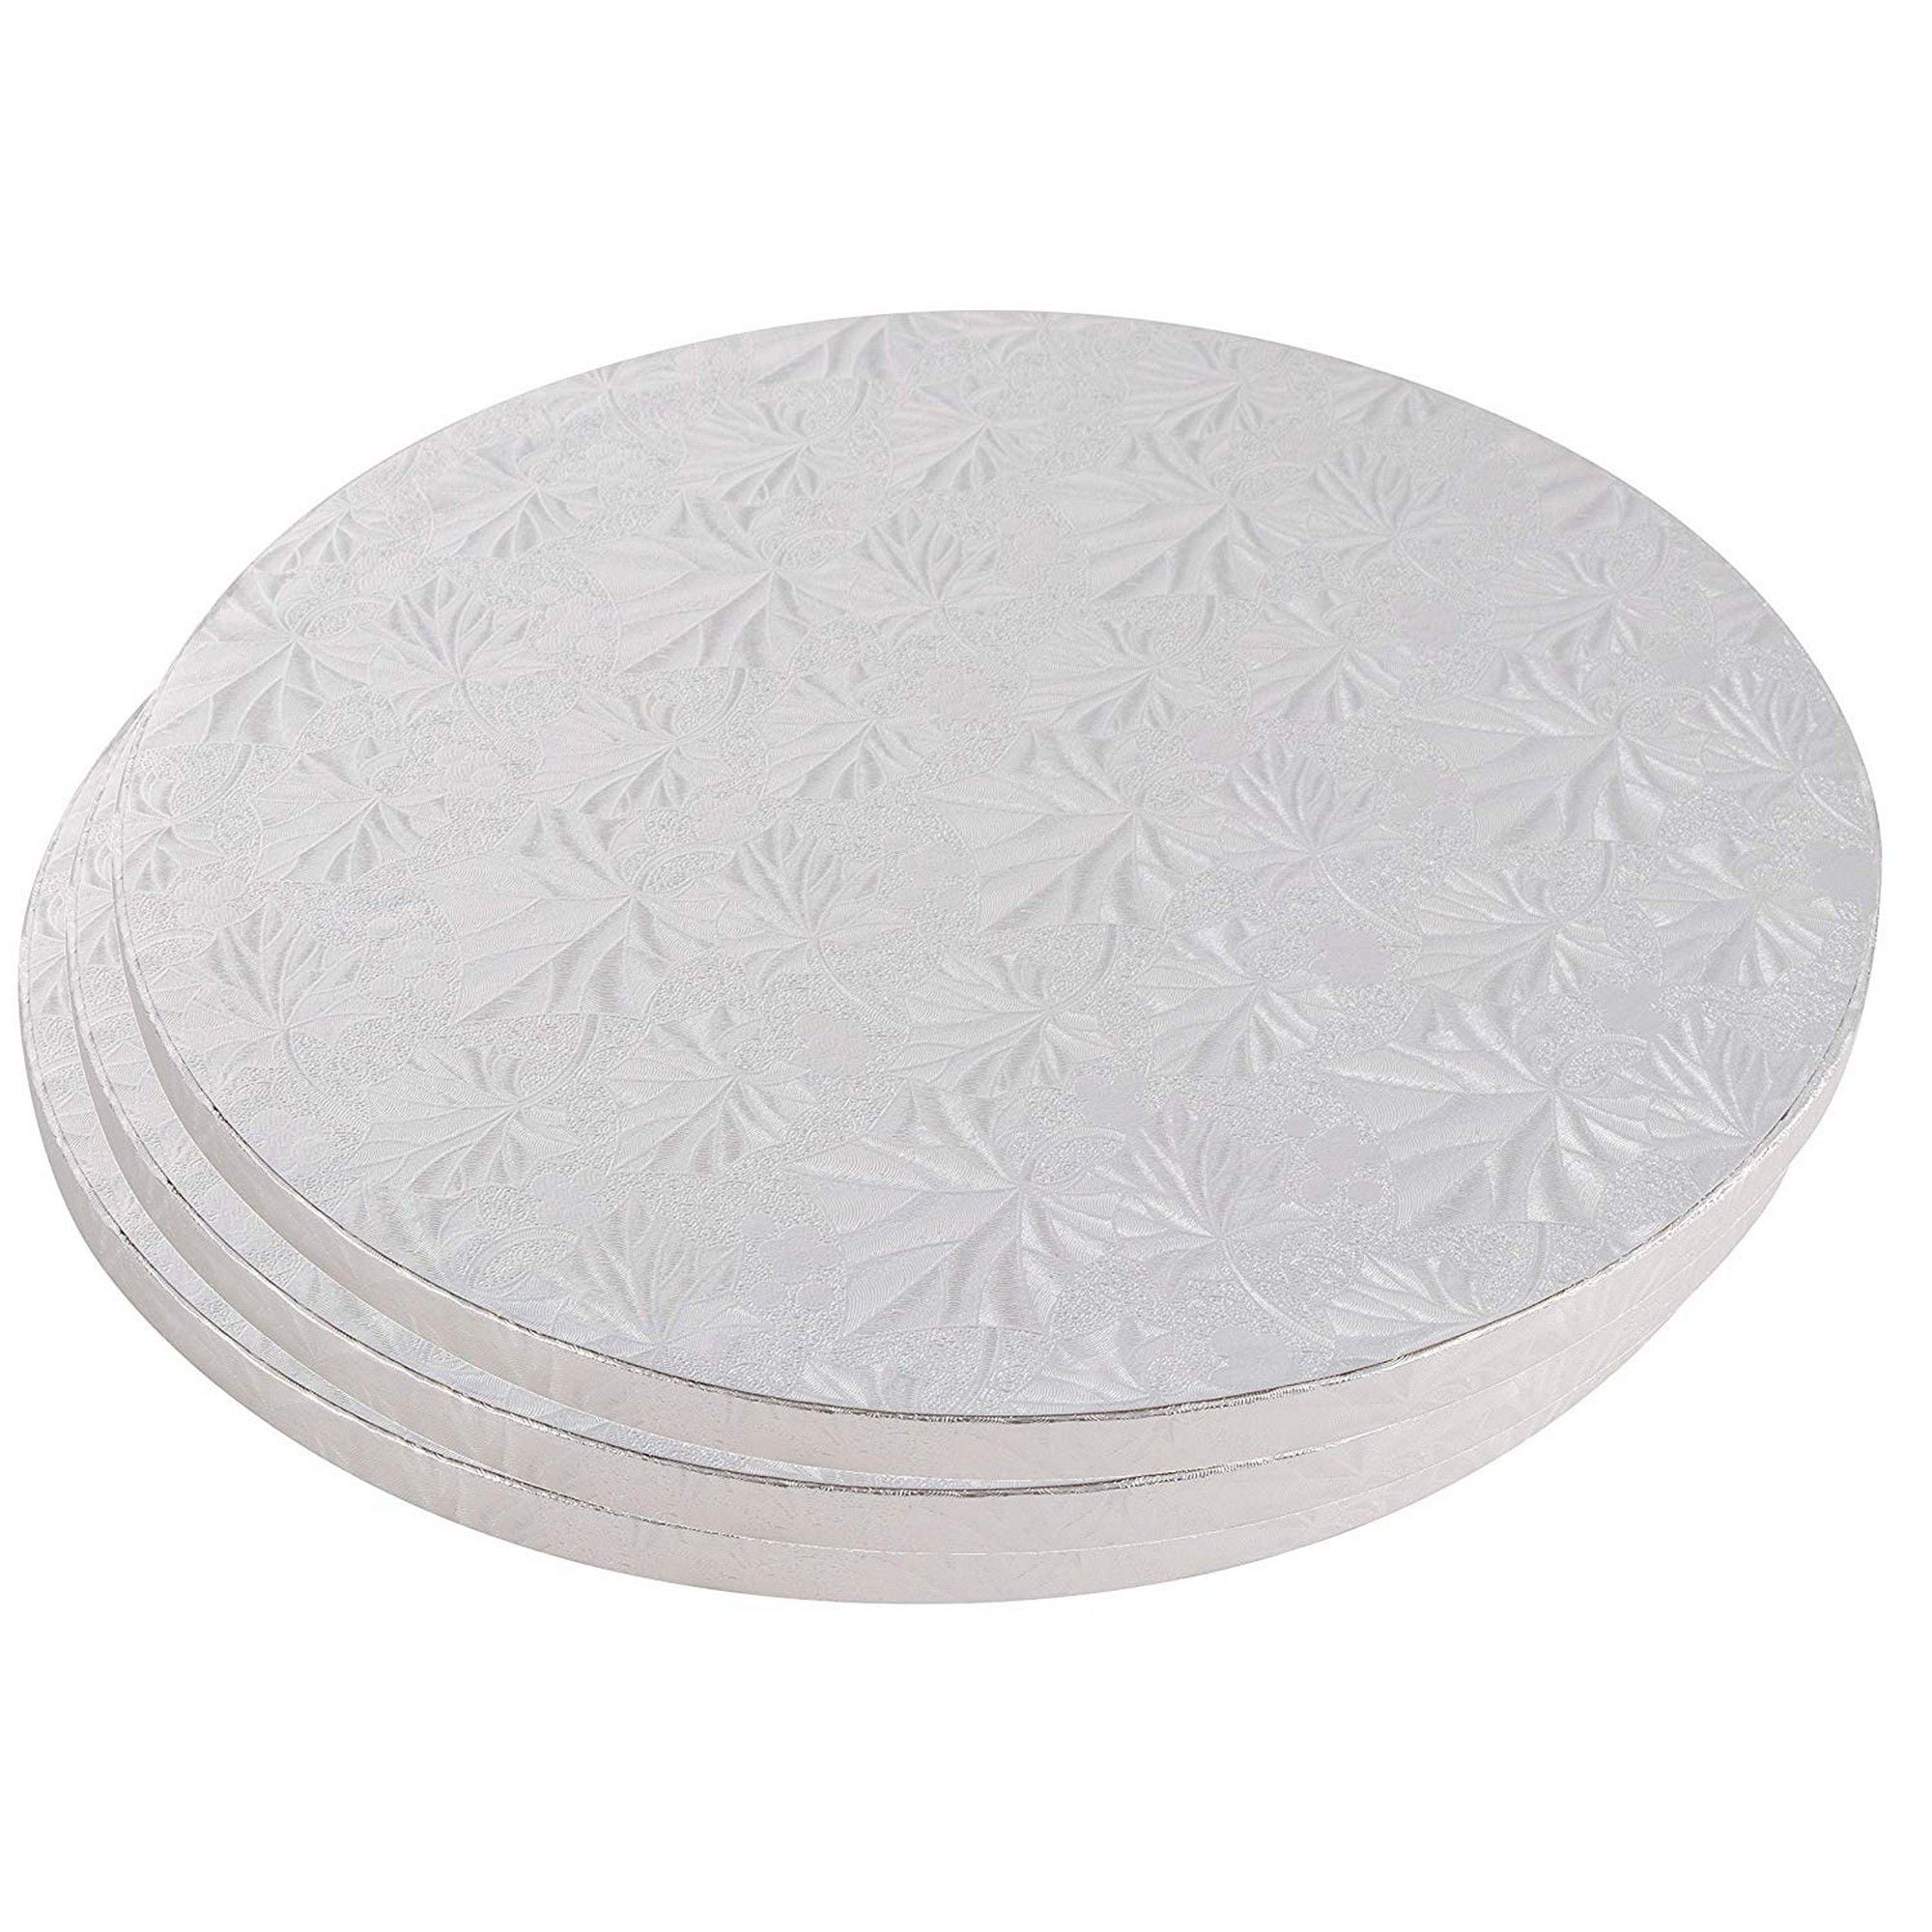 Cake Boards Rounds 3 Piece Silver Foil Pizza Base